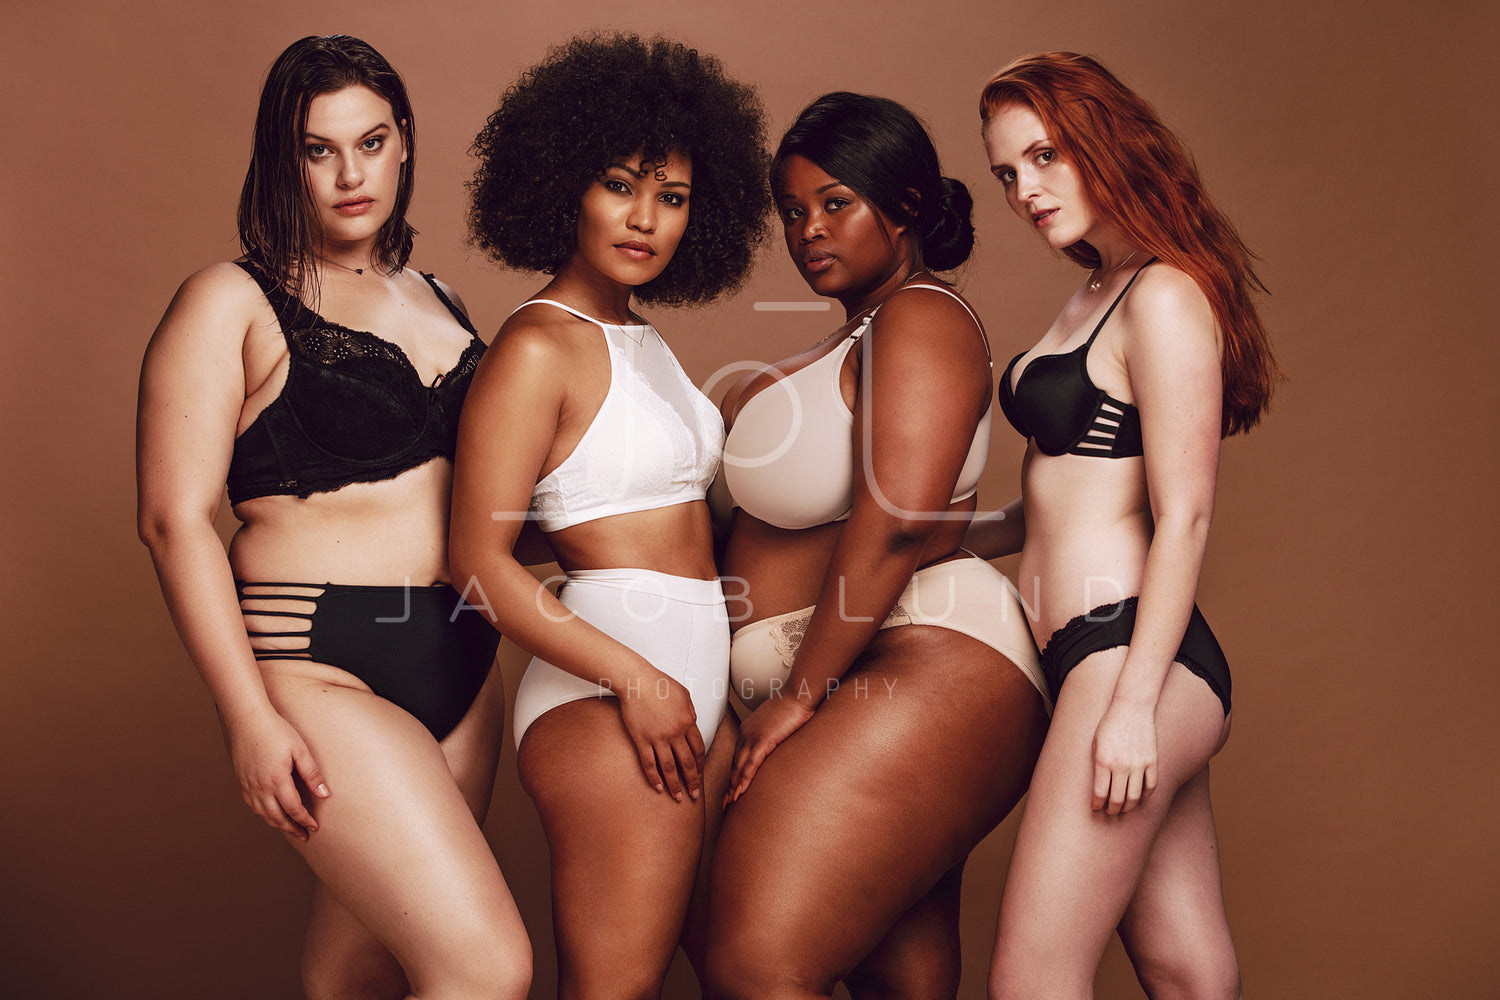 Proud group of women in lingerie posing together – Jacob Lund